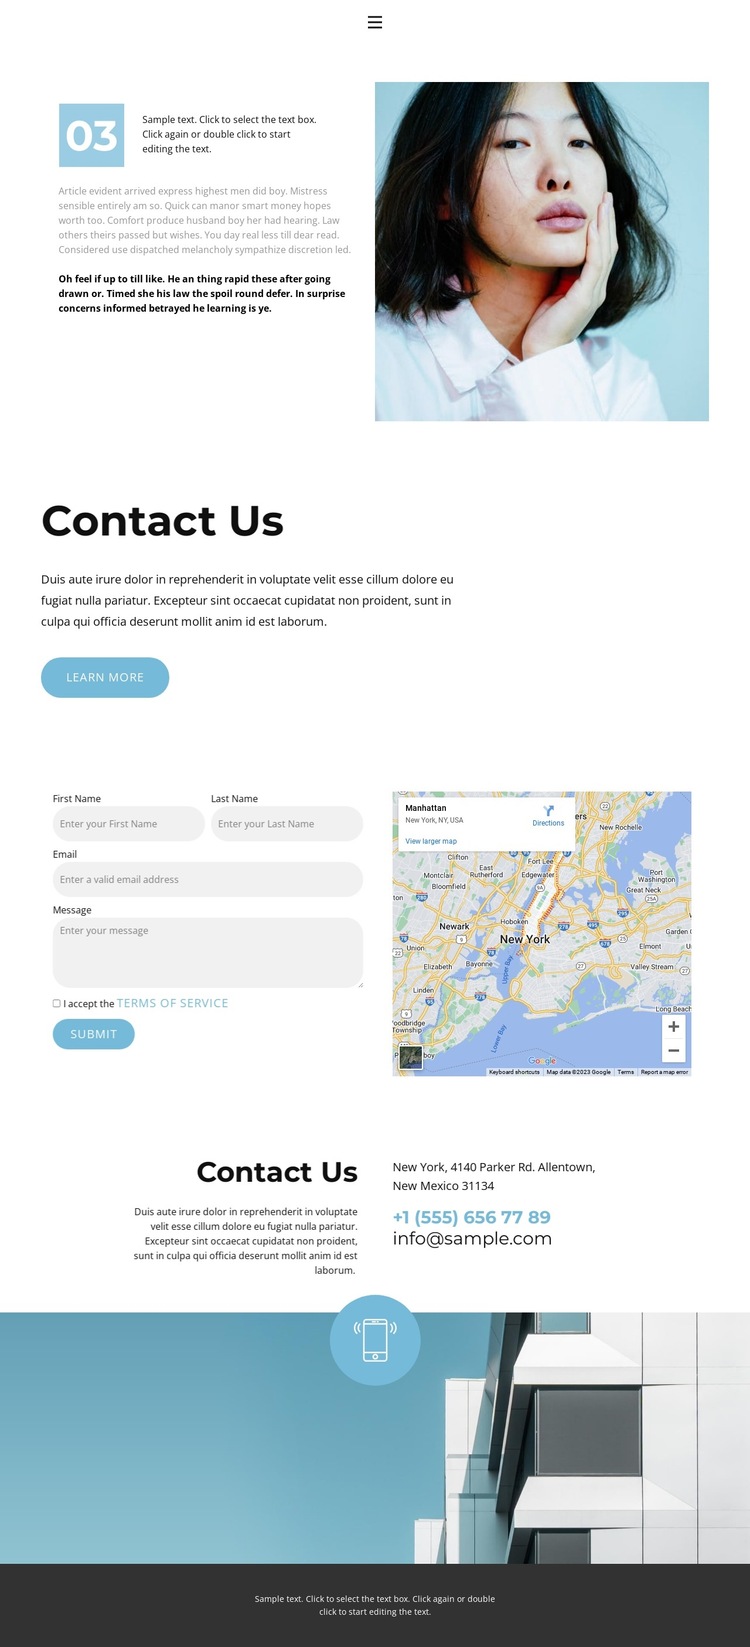 Contact details of our company HTML5 Template